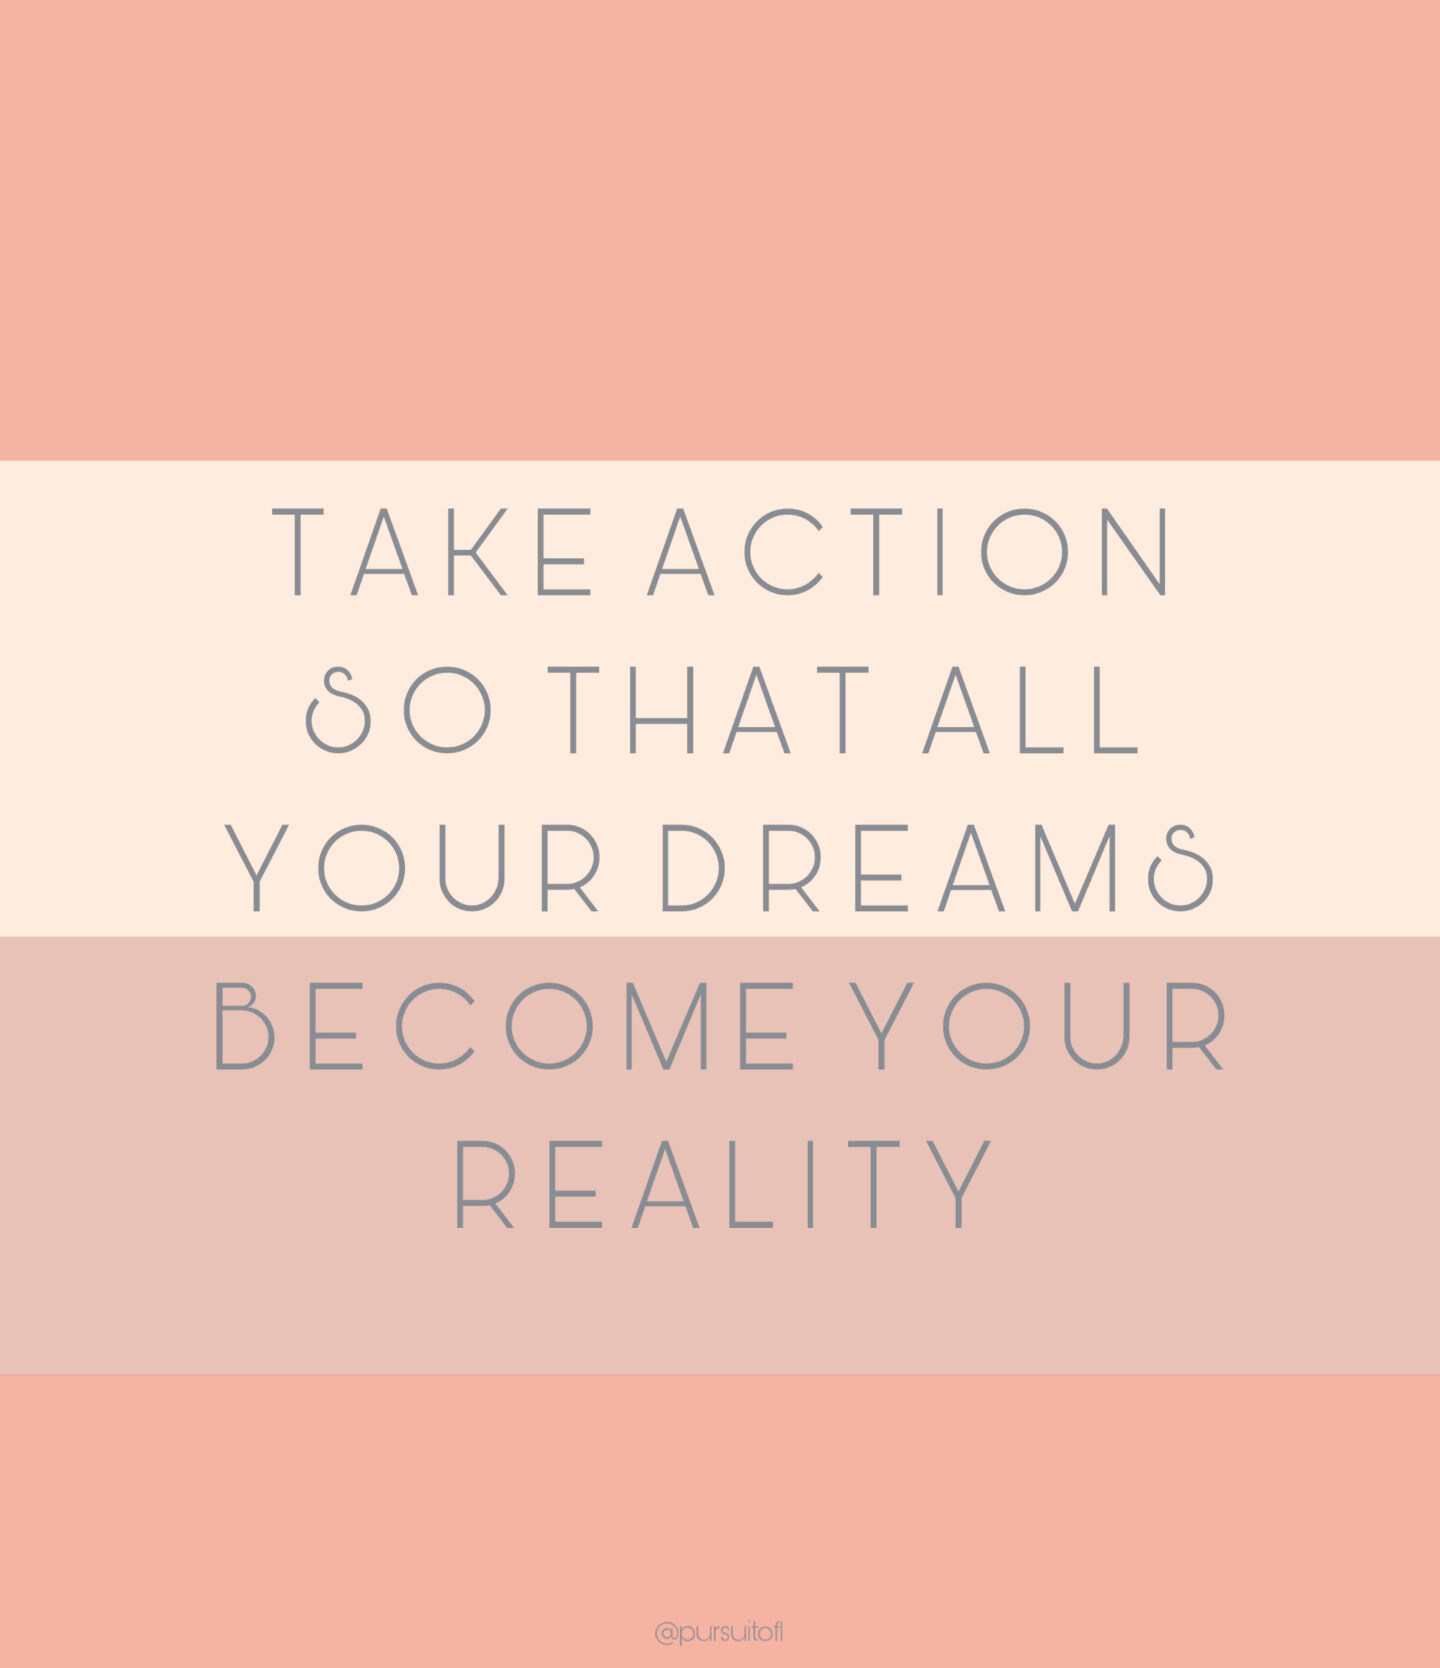 Neutral Color Block Tablet with Inspirational Quote Take Action So That All Your Dreams Become Your Reality